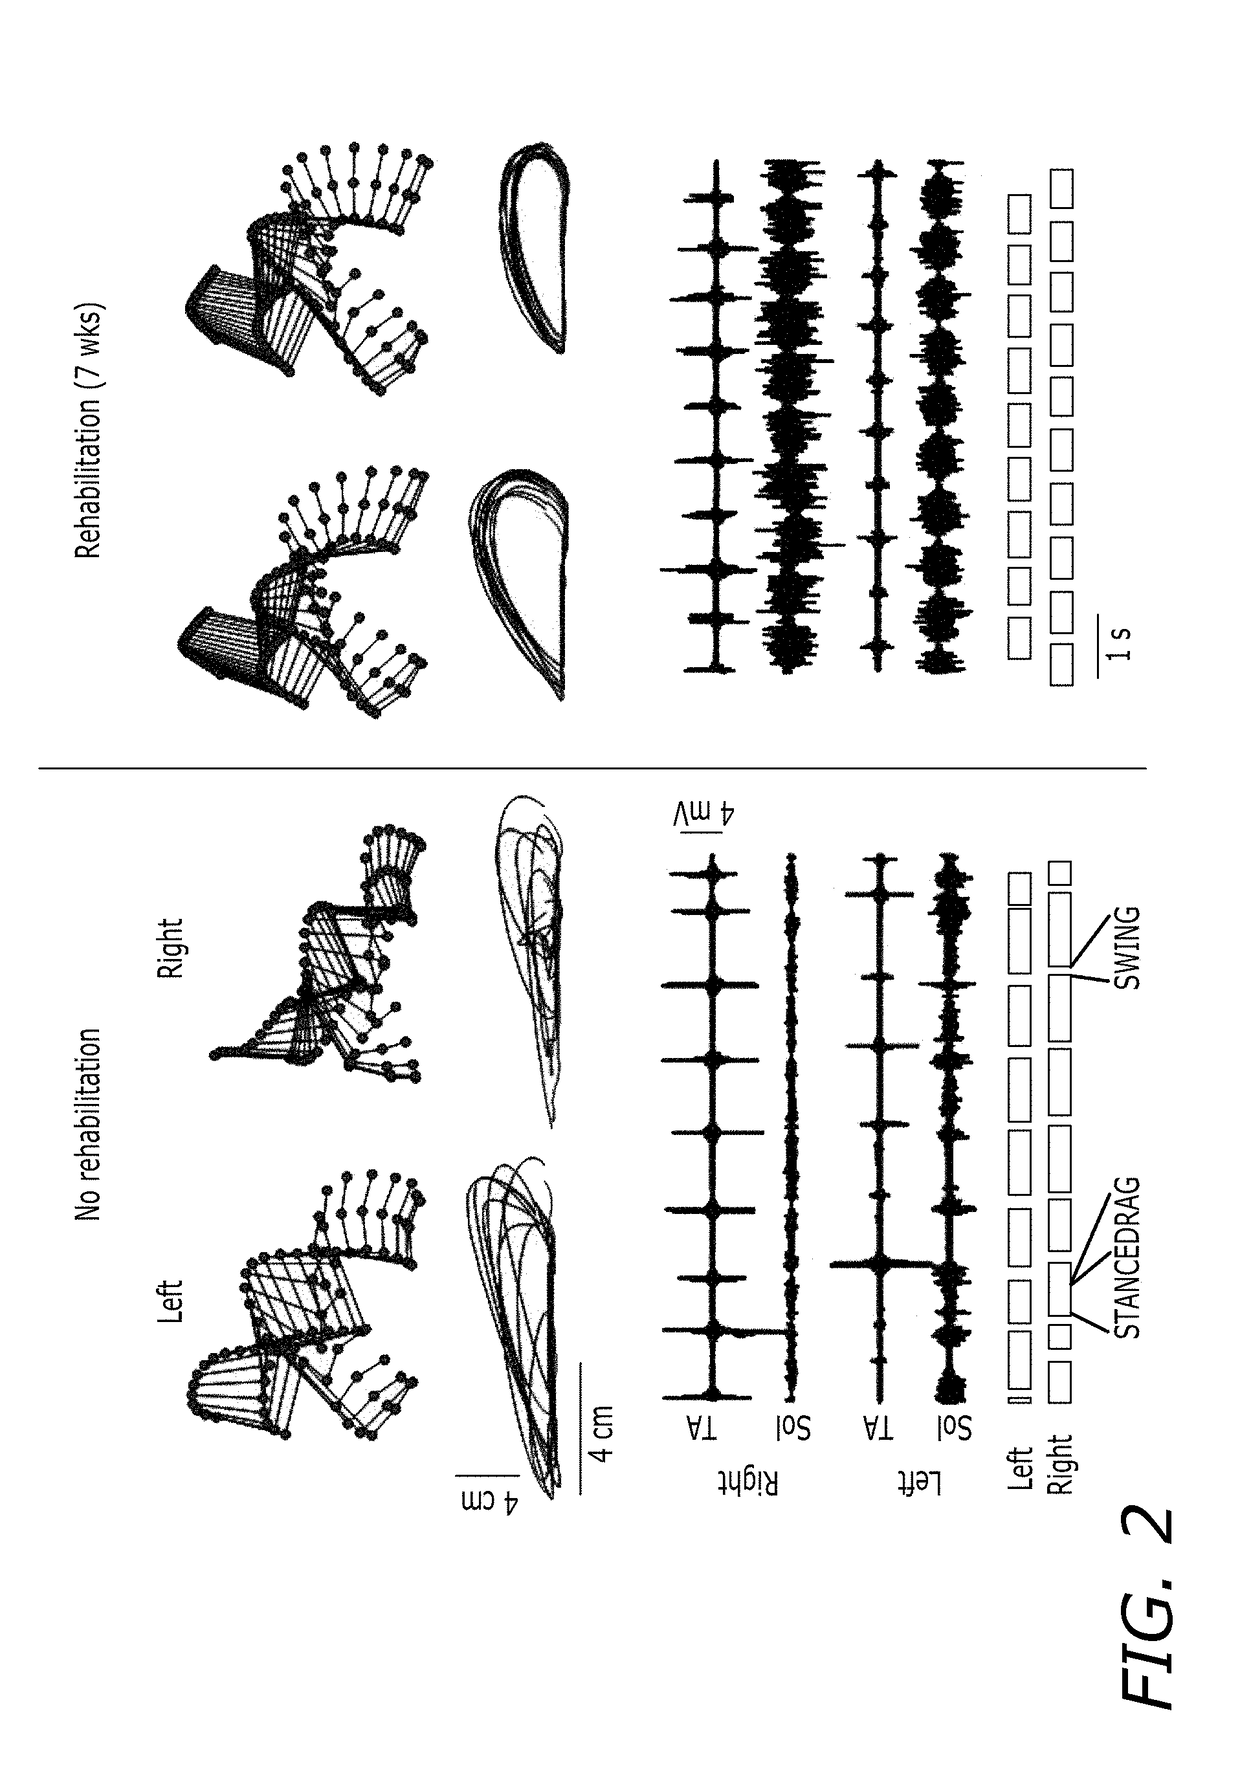 Epidural stimulation for facilitation of locomotion, posture, voluntary movement, and recovery of autonomic, sexual, vasomotor, and cognitive function after neurological injury